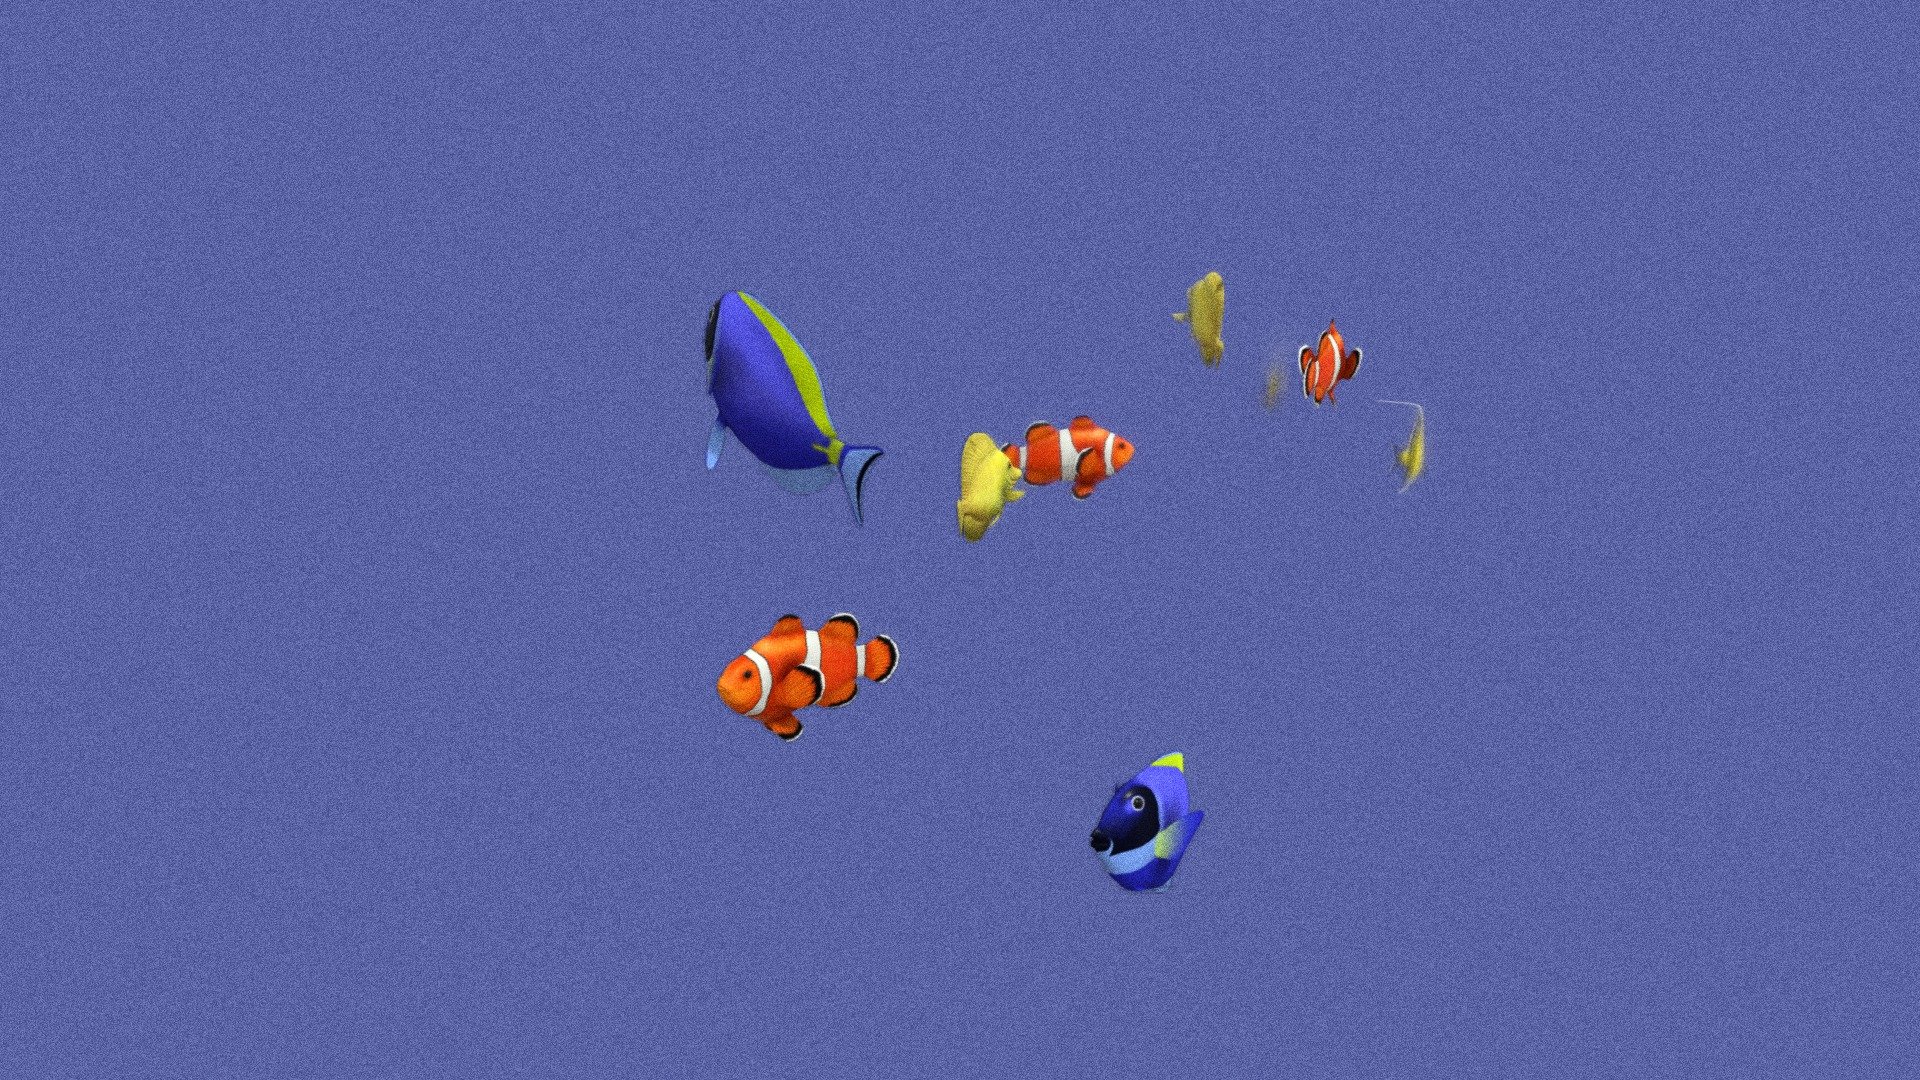 A looping Animation of Swimming Tropical Fish in School.

See this 3D model in action, and more models like it, in this collection of free augmented reality apps:

https://morpheusar.com/ - Animated Swimming Tropical Fish School Loop - Download Free 3D model by LasquetiSpice 3d model